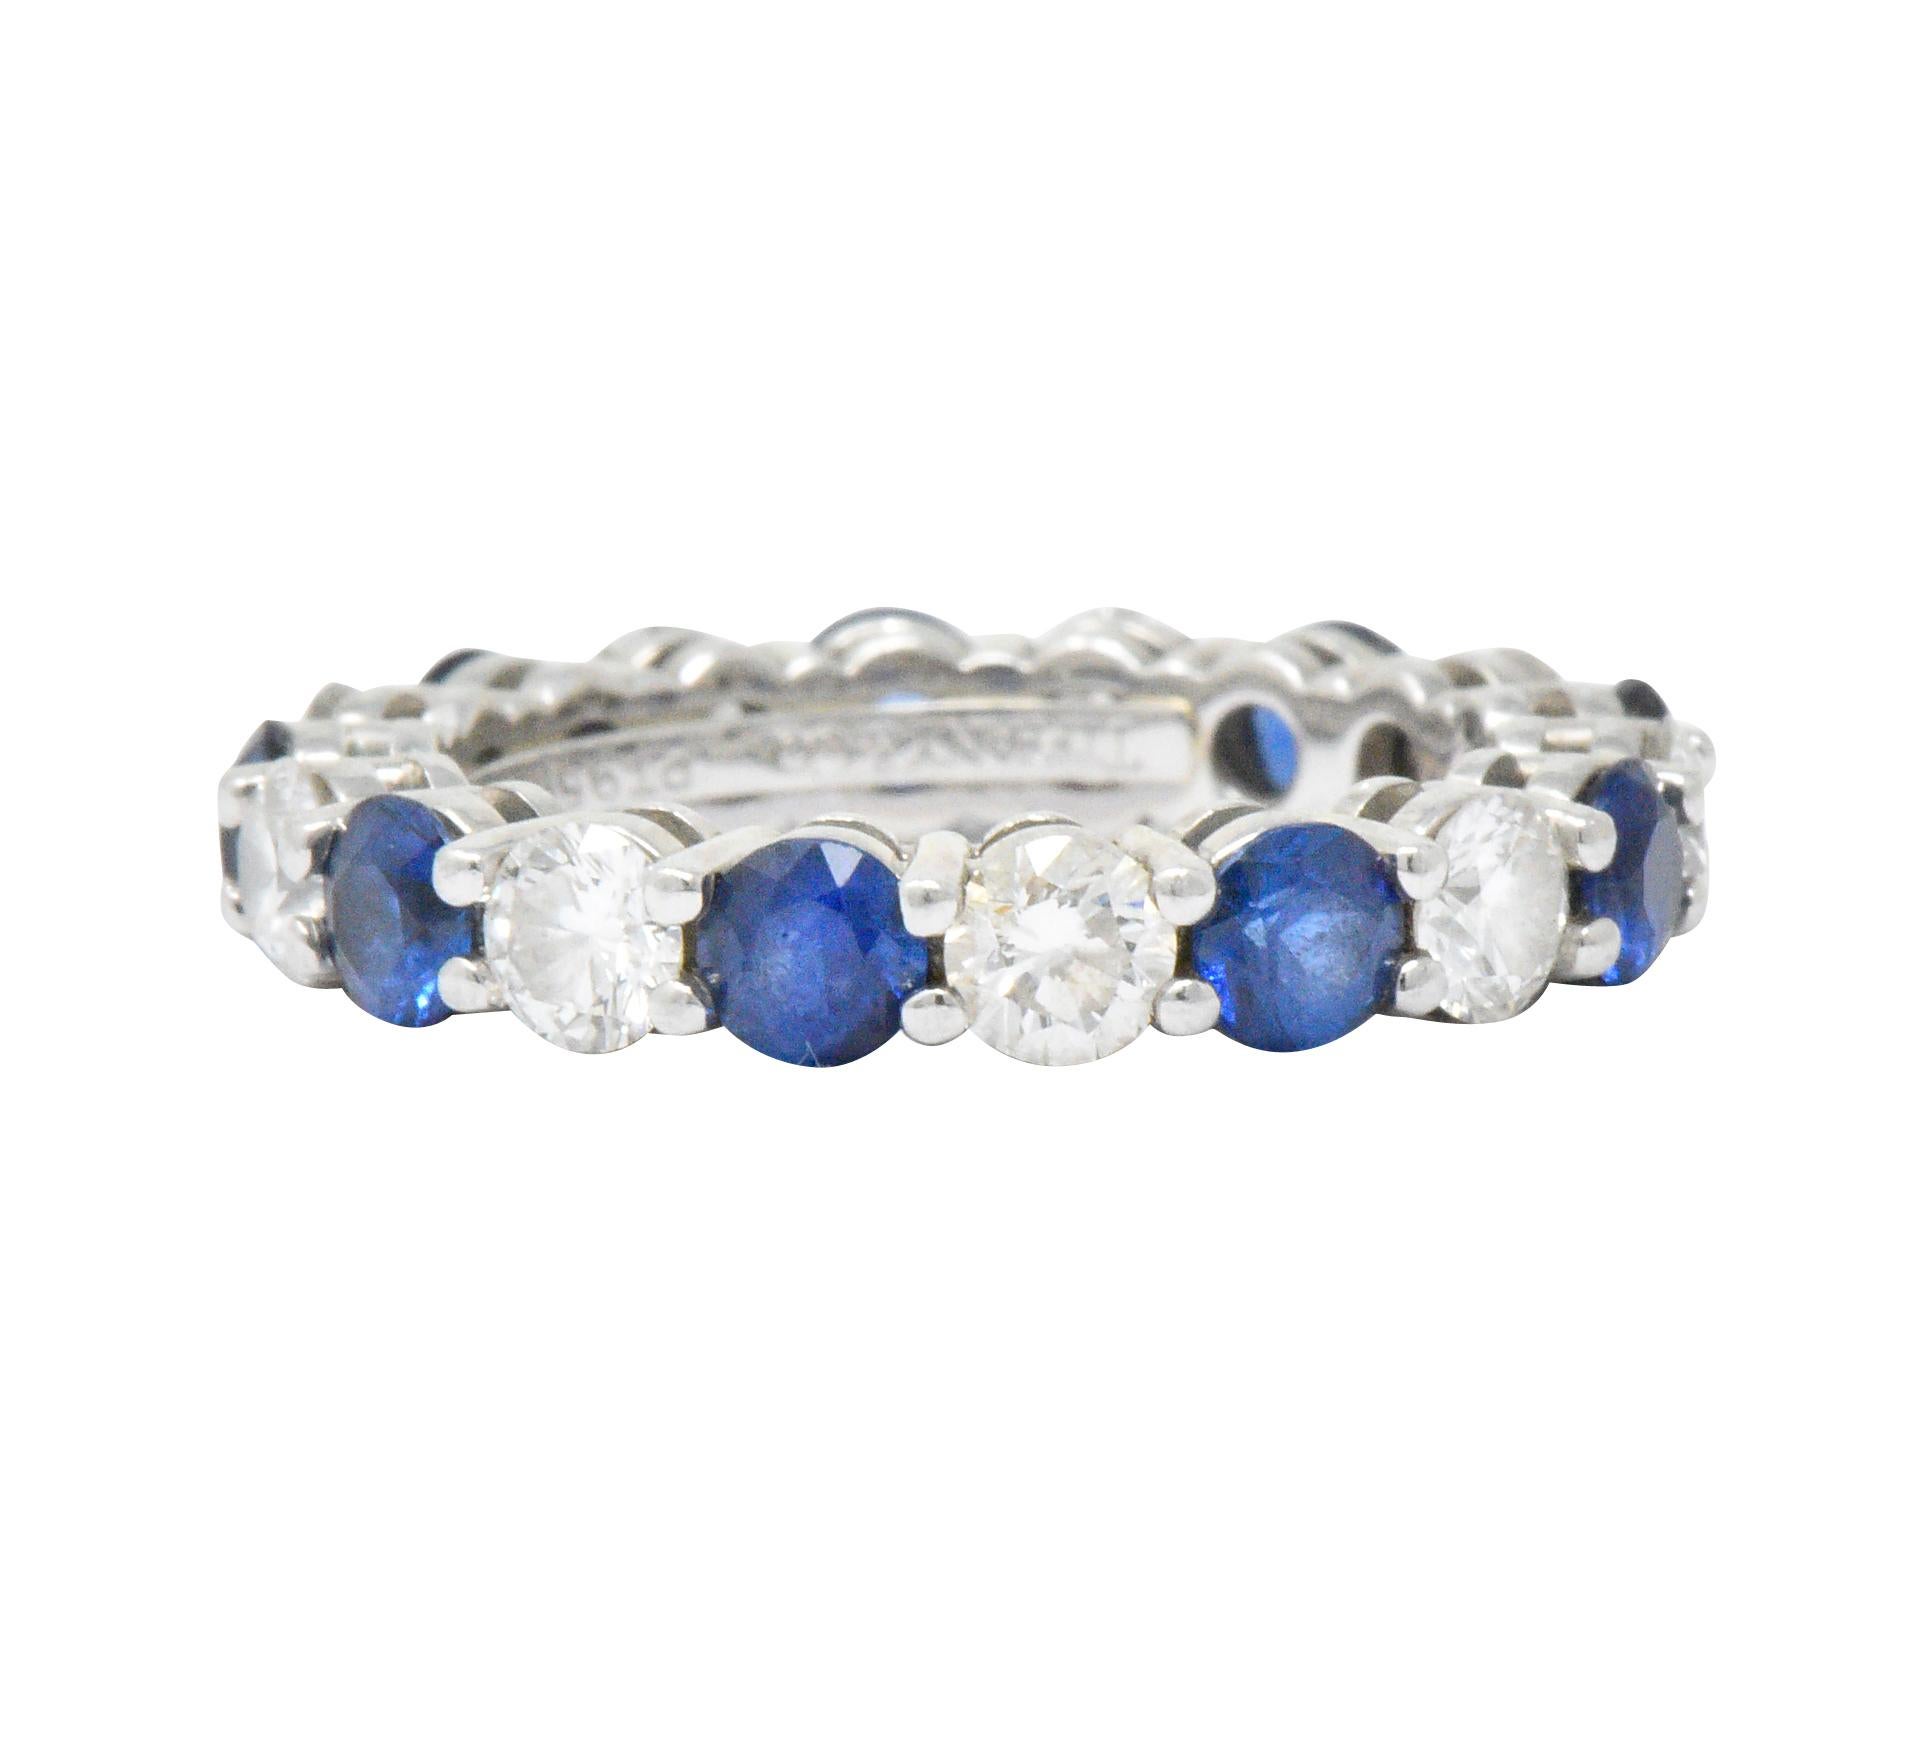 Featuring approximately 1.35 CTW of (9) round brilliant cut diamonds F-G color and VS clarity

Alternating (9) bright blue natural sapphires weighing 1.89 CTW

From the Embrace Collection 

Fully signed Tiffany & Co. PT950

Retail: $9,025

Size: 5